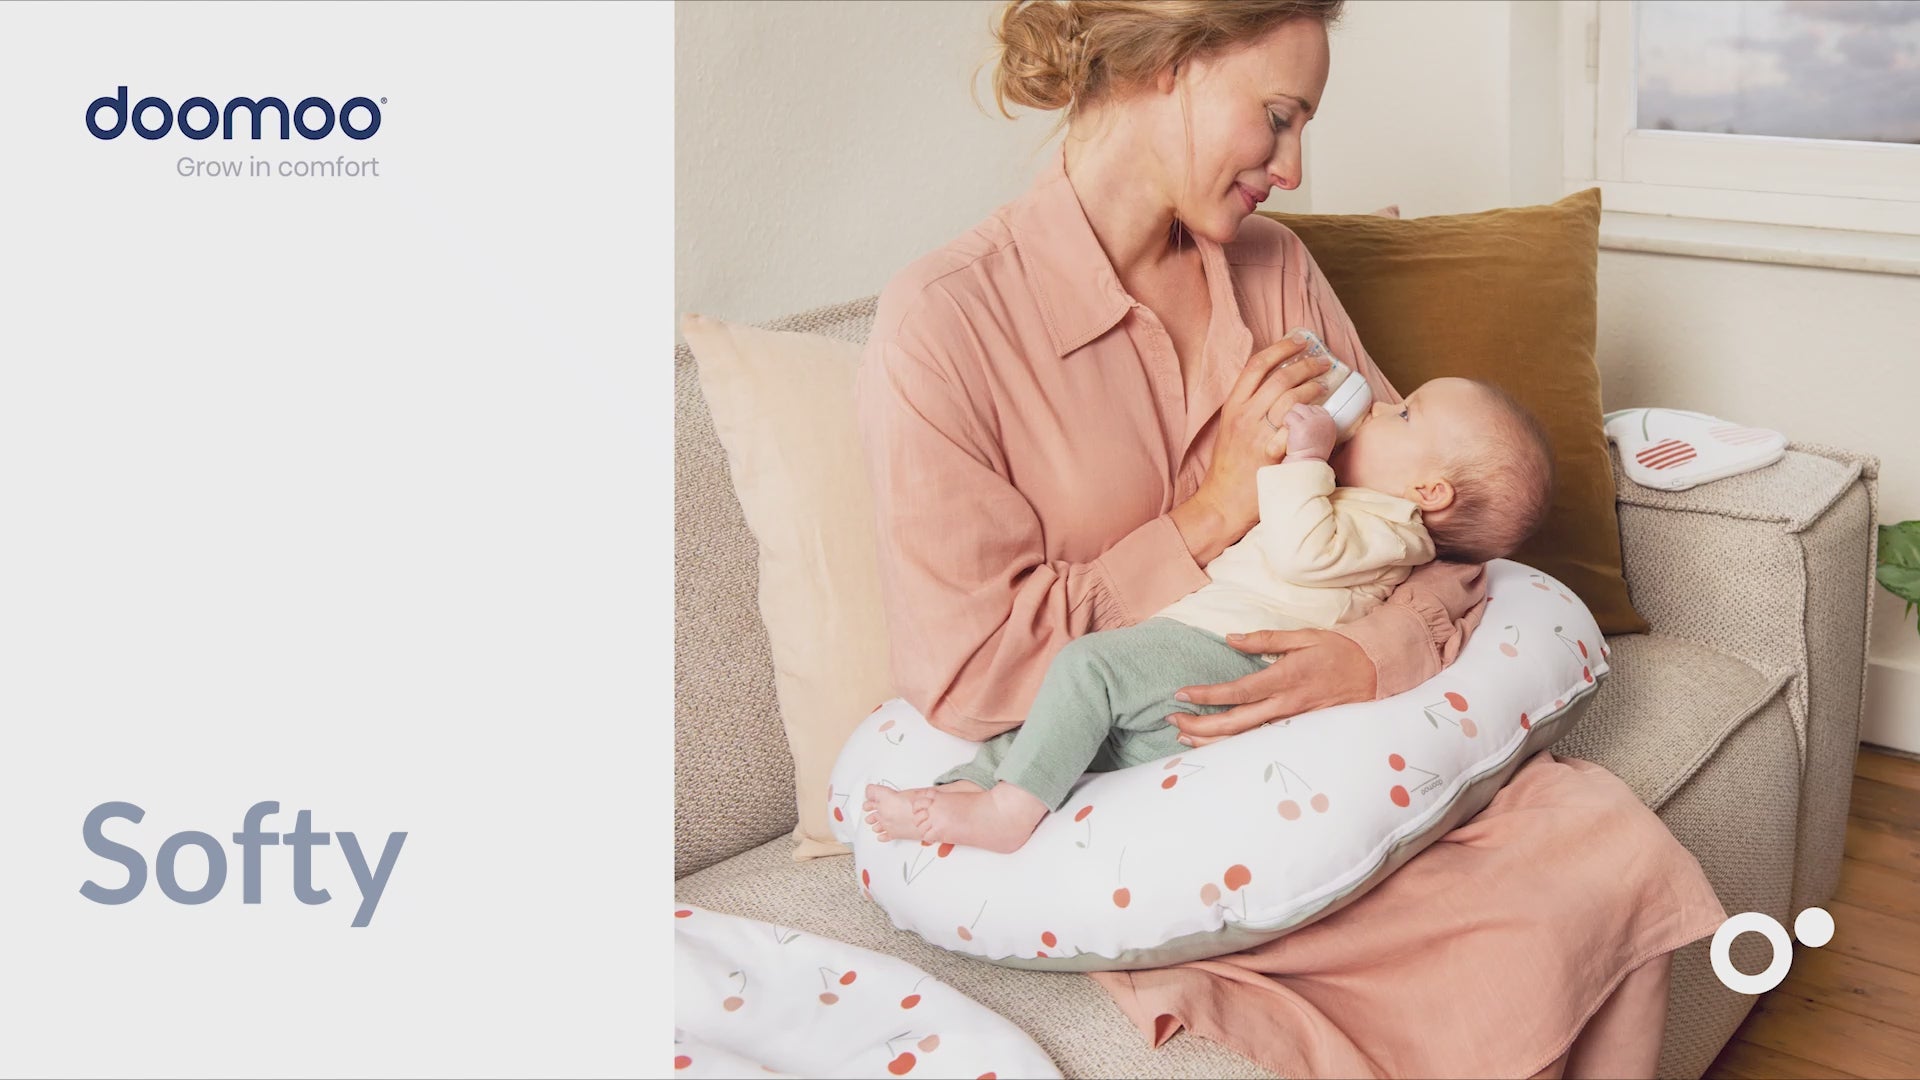 doomoo softy 2-in-1 multi-functional pillow for nursing and lounging